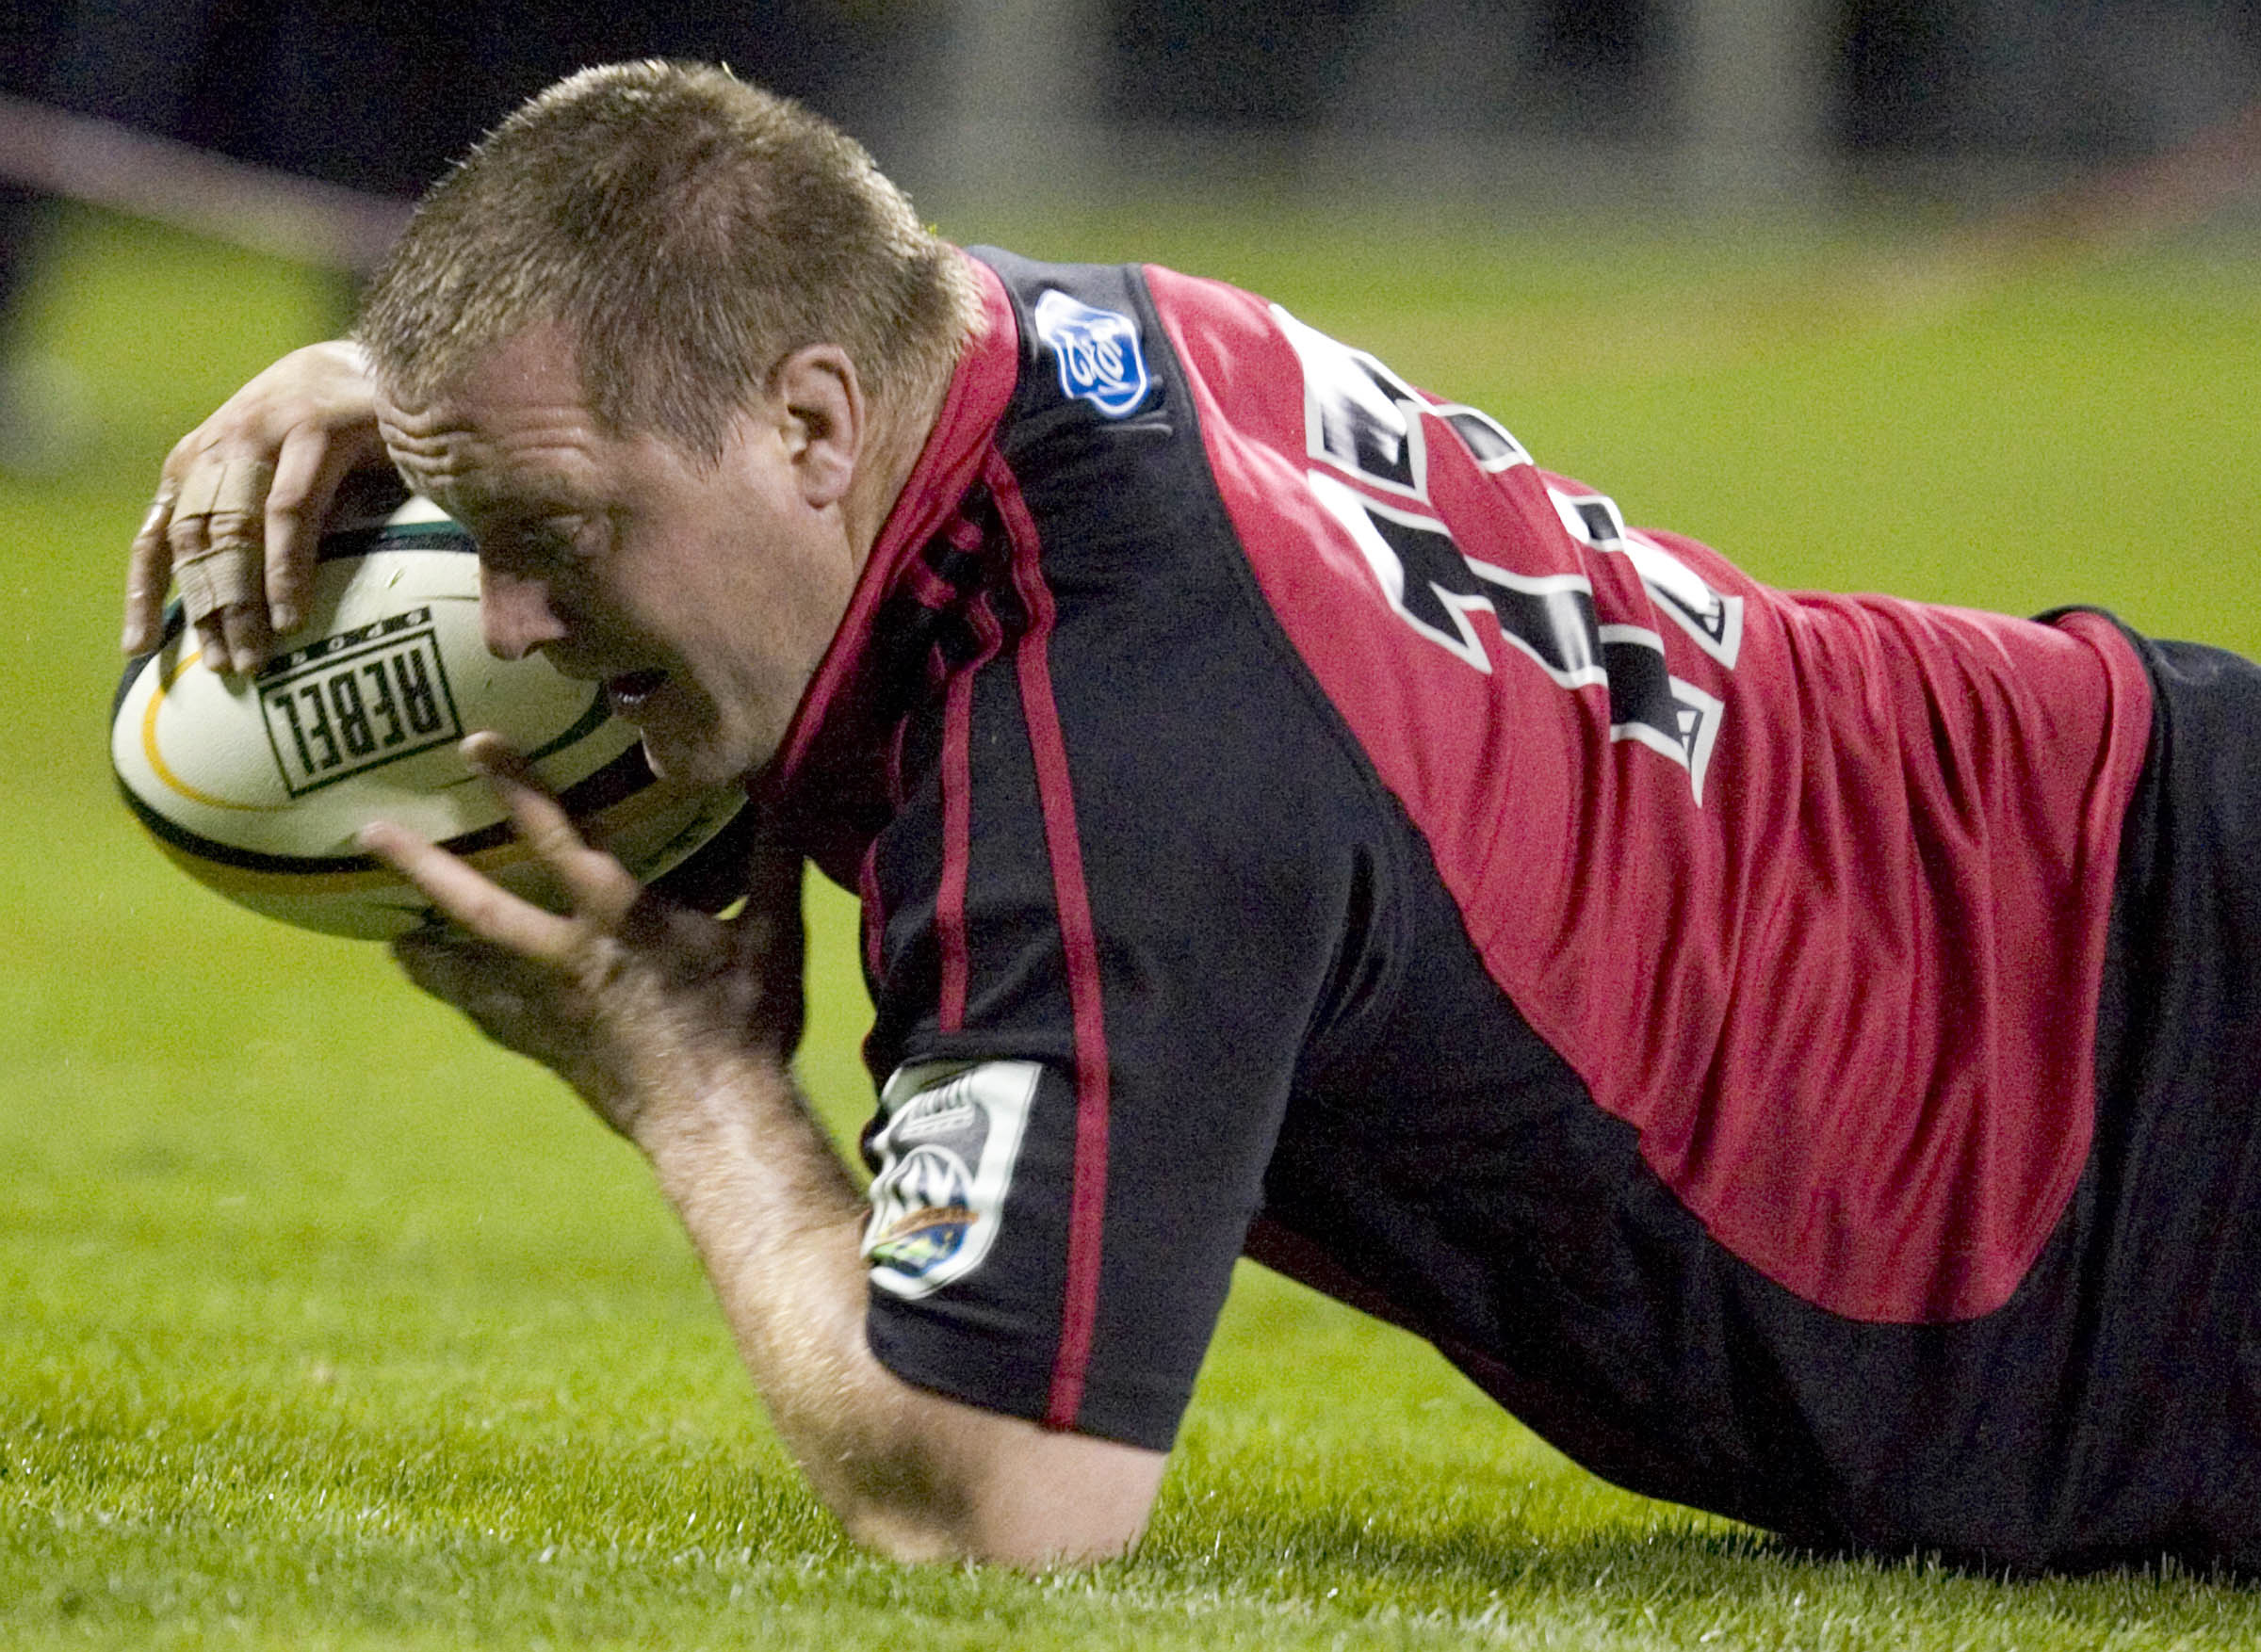 Crusaders Johnstone scores try during Super 14 rugby match against Brumbies in Christchurch